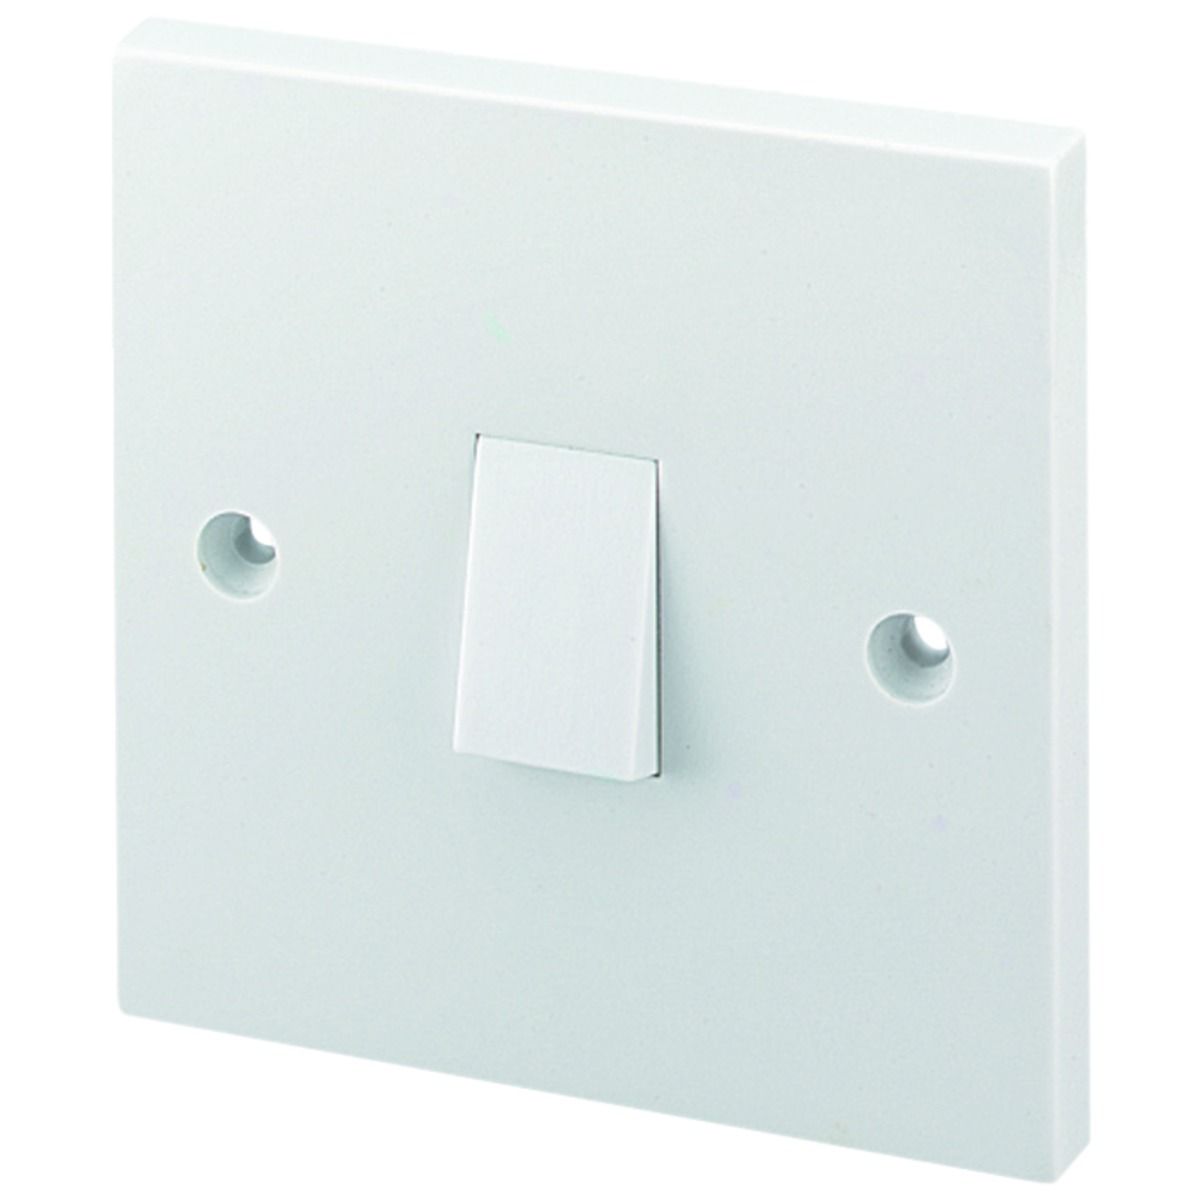 Image of Wickes 10 Amp 1 Gang 2 Way Light Switch - White